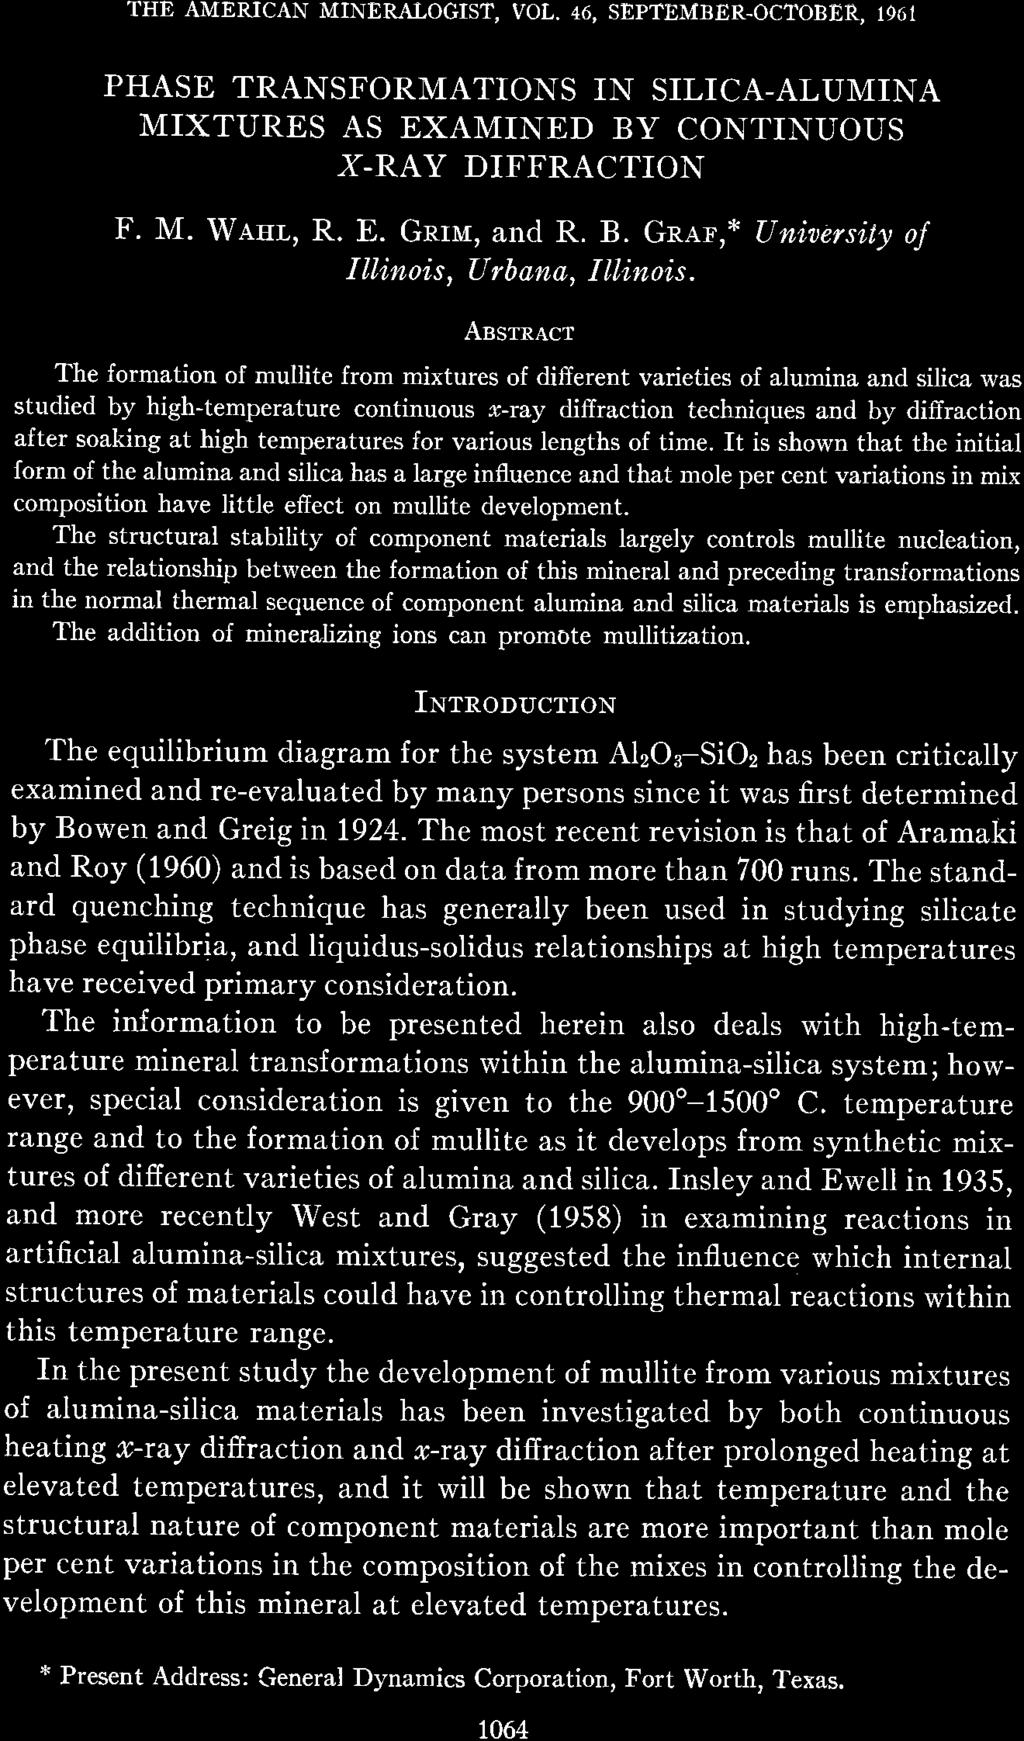 THE AMERICAN MINERAI-OGIST, VOL. 46, SEPTEMBER-OCTOBER. 1961 PHASE TRANSFORMATIONS IN SILICA-ALUMINA MIXTURES AS EXAMINED BY CONTINUOUS X-RAY DIFFRACTION F. M. W.tsr,, R. E. Gnru, and R. B. Gnar',* Unioersity oj Ill in ois, Urba n a, I I I i nois.